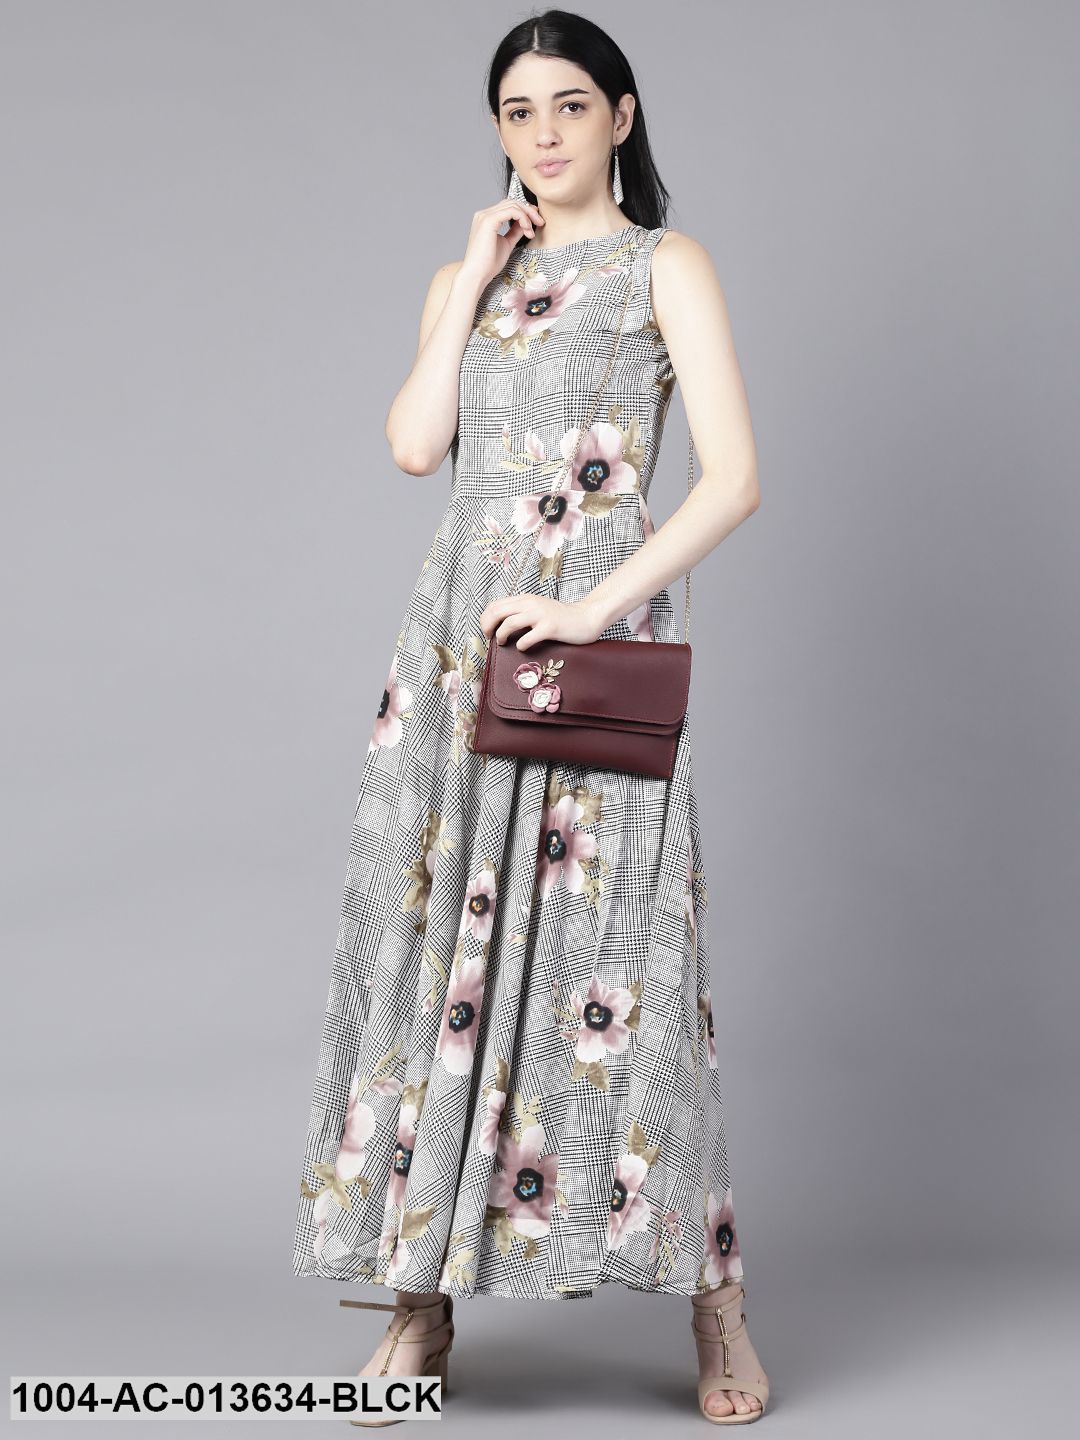 Black (Multi) Floral Printed Round Neck Fit and Flare Dress